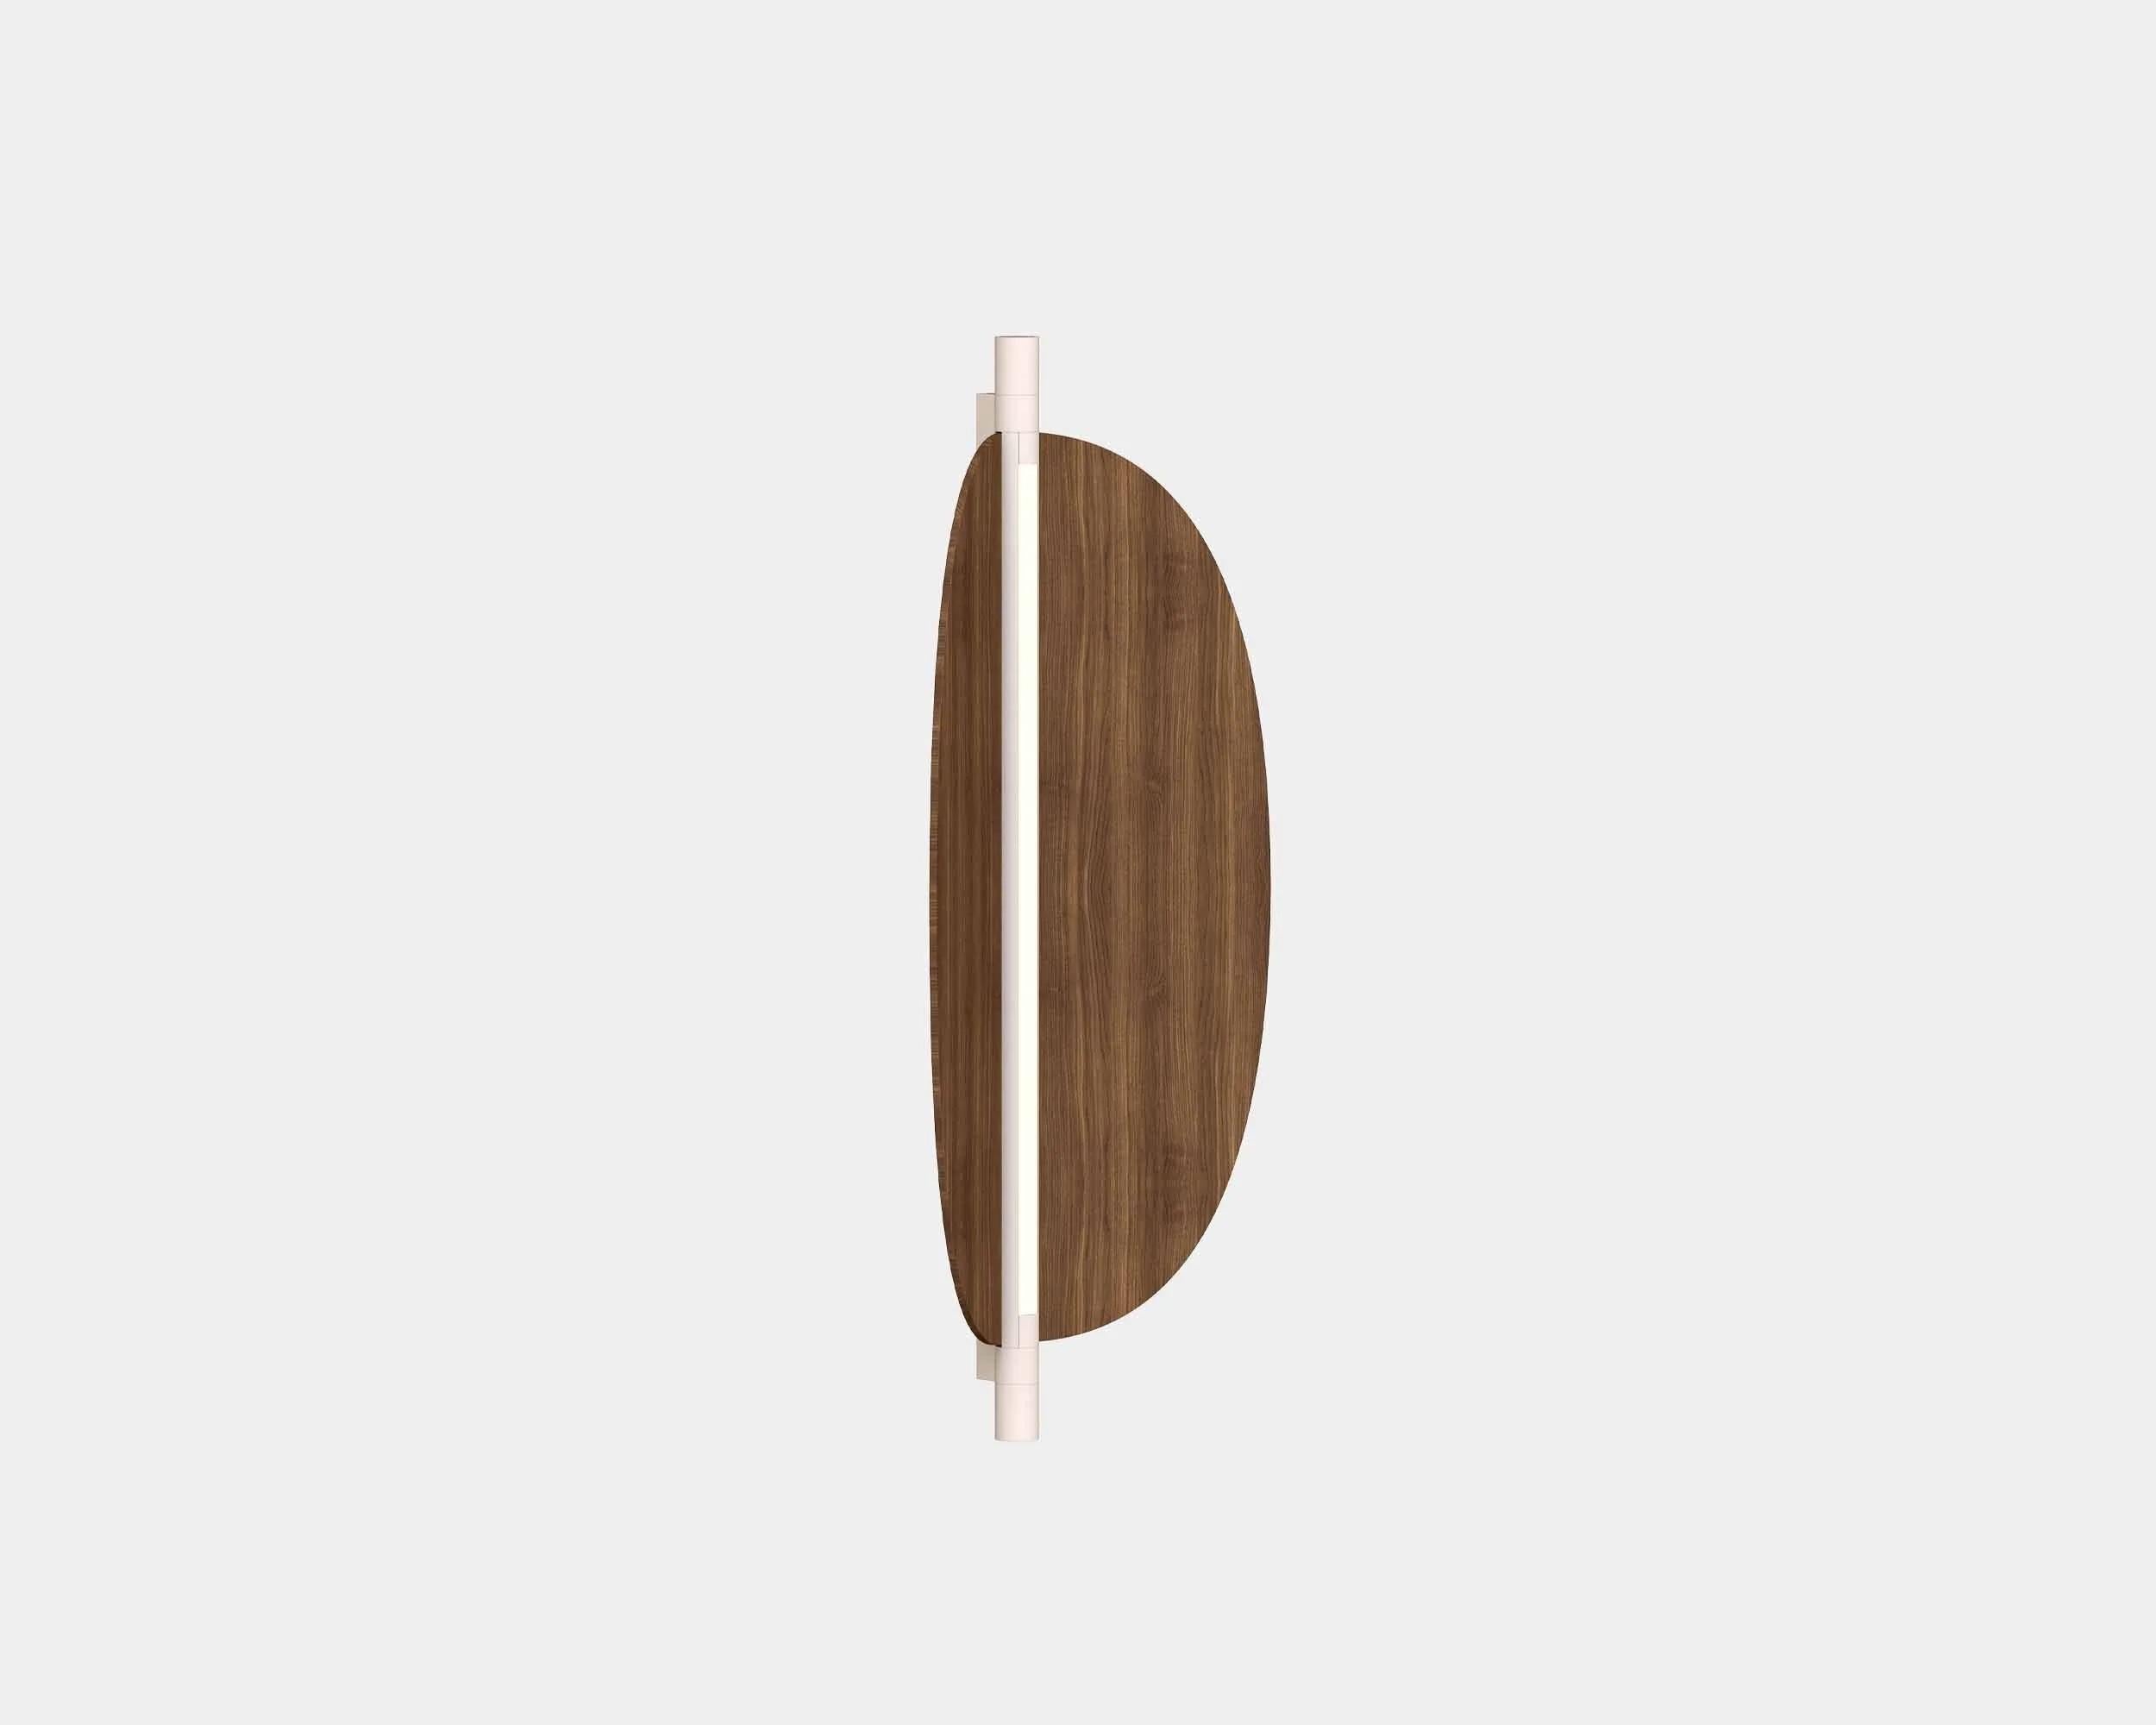 Metal Modern Wall Lamp 'Thula 562.41' by Federica Biasi x Tooy, Beige + Leather For Sale